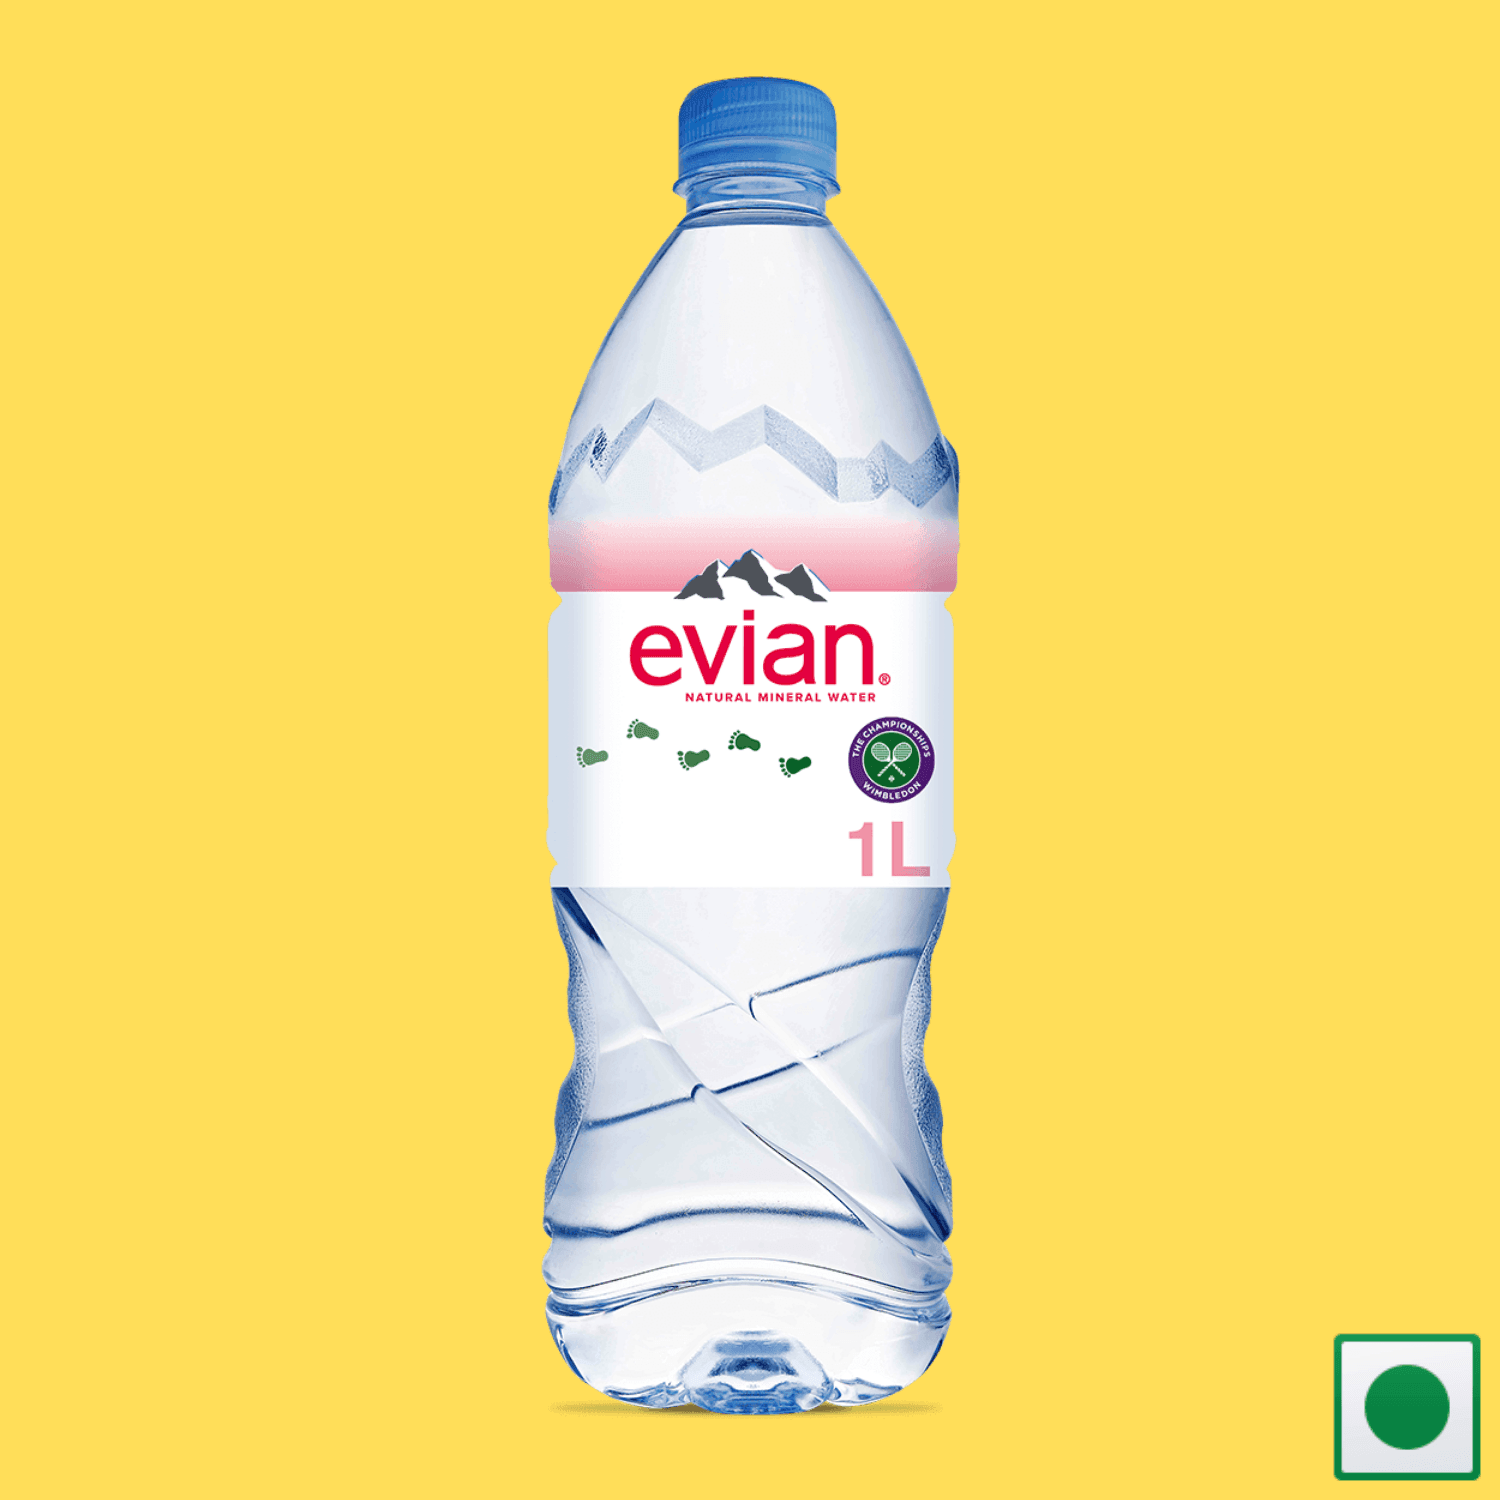 Evian Natural Mineral Water, 1L (Imported)